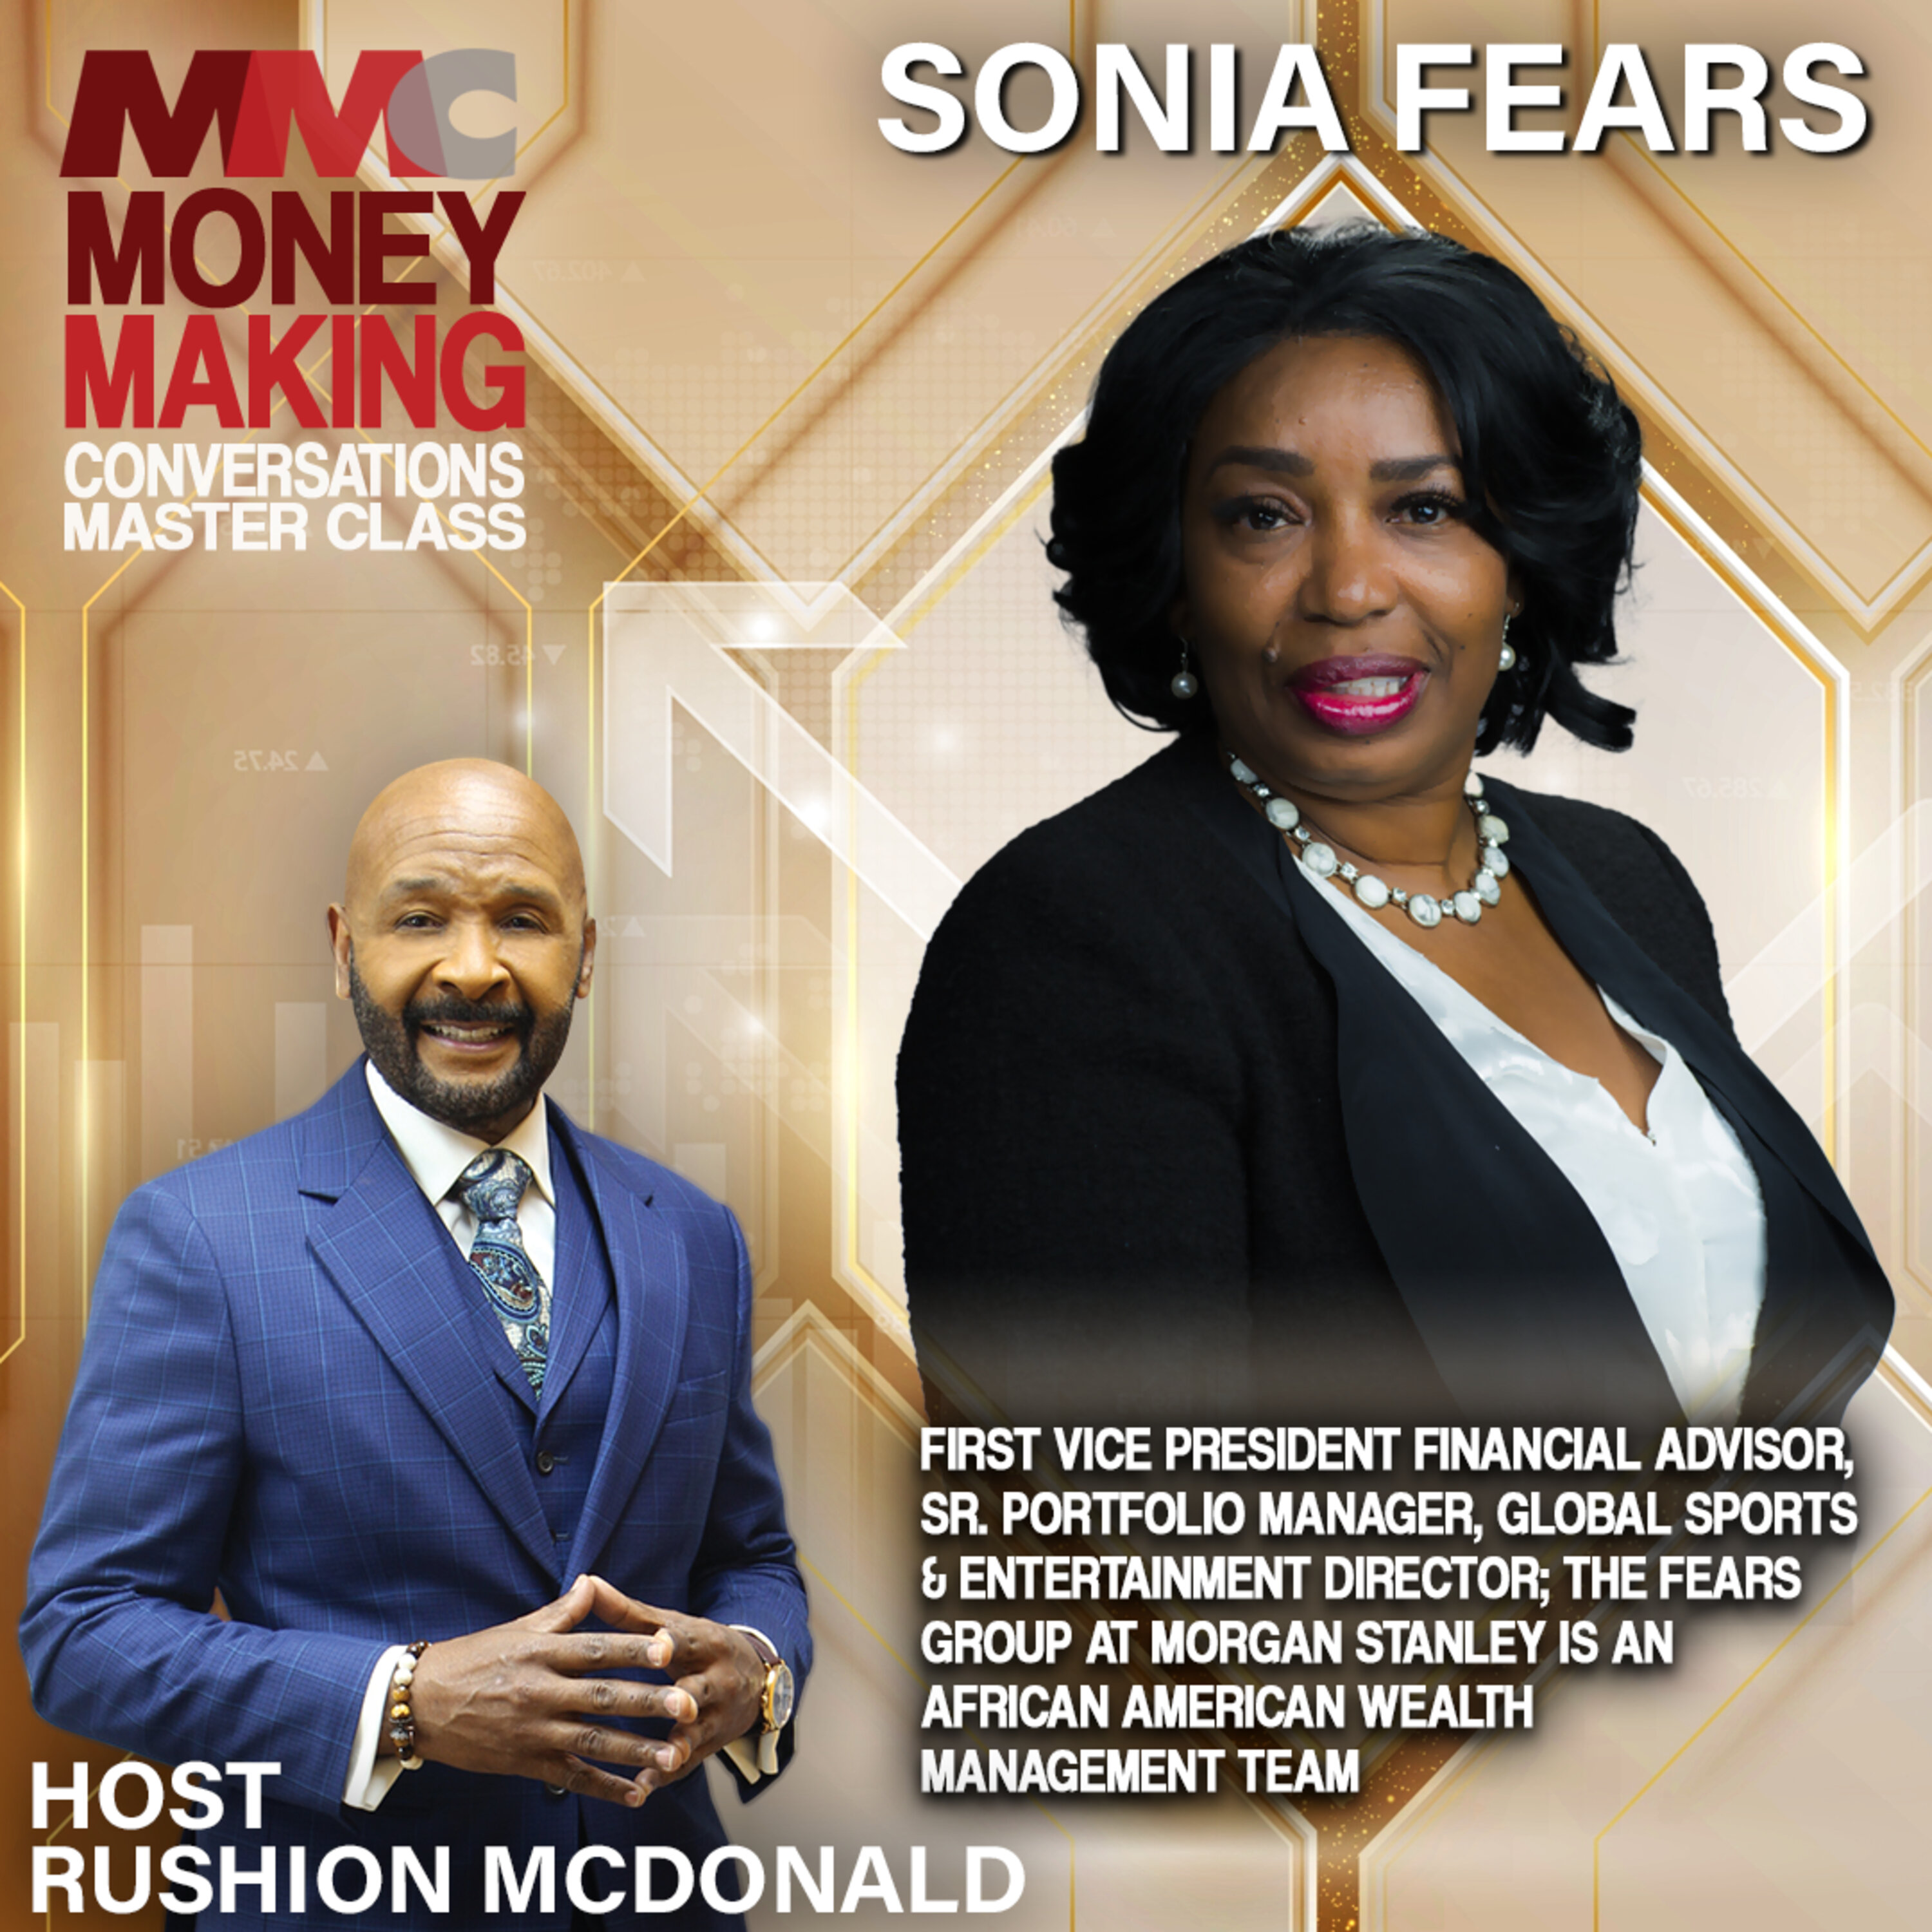 Financial Expert Sonia Fears leads an All-Black Wealth Management Team at Morgan Stanley Financial.